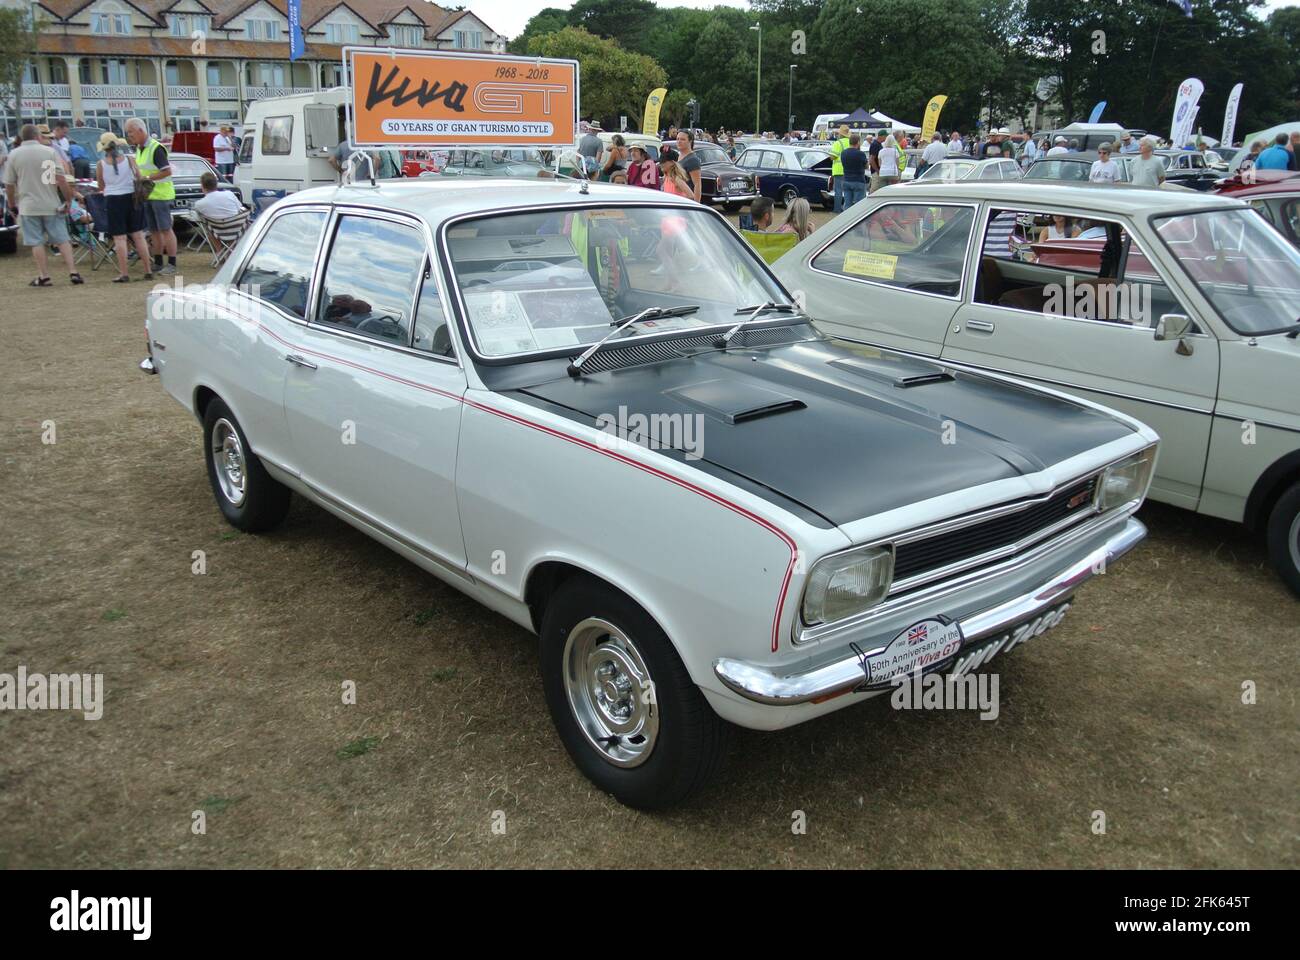 A 1968 Vauxhall Viva parked up on display at the Riviera classic car show, Paignton, Devon, England. Stock Photo